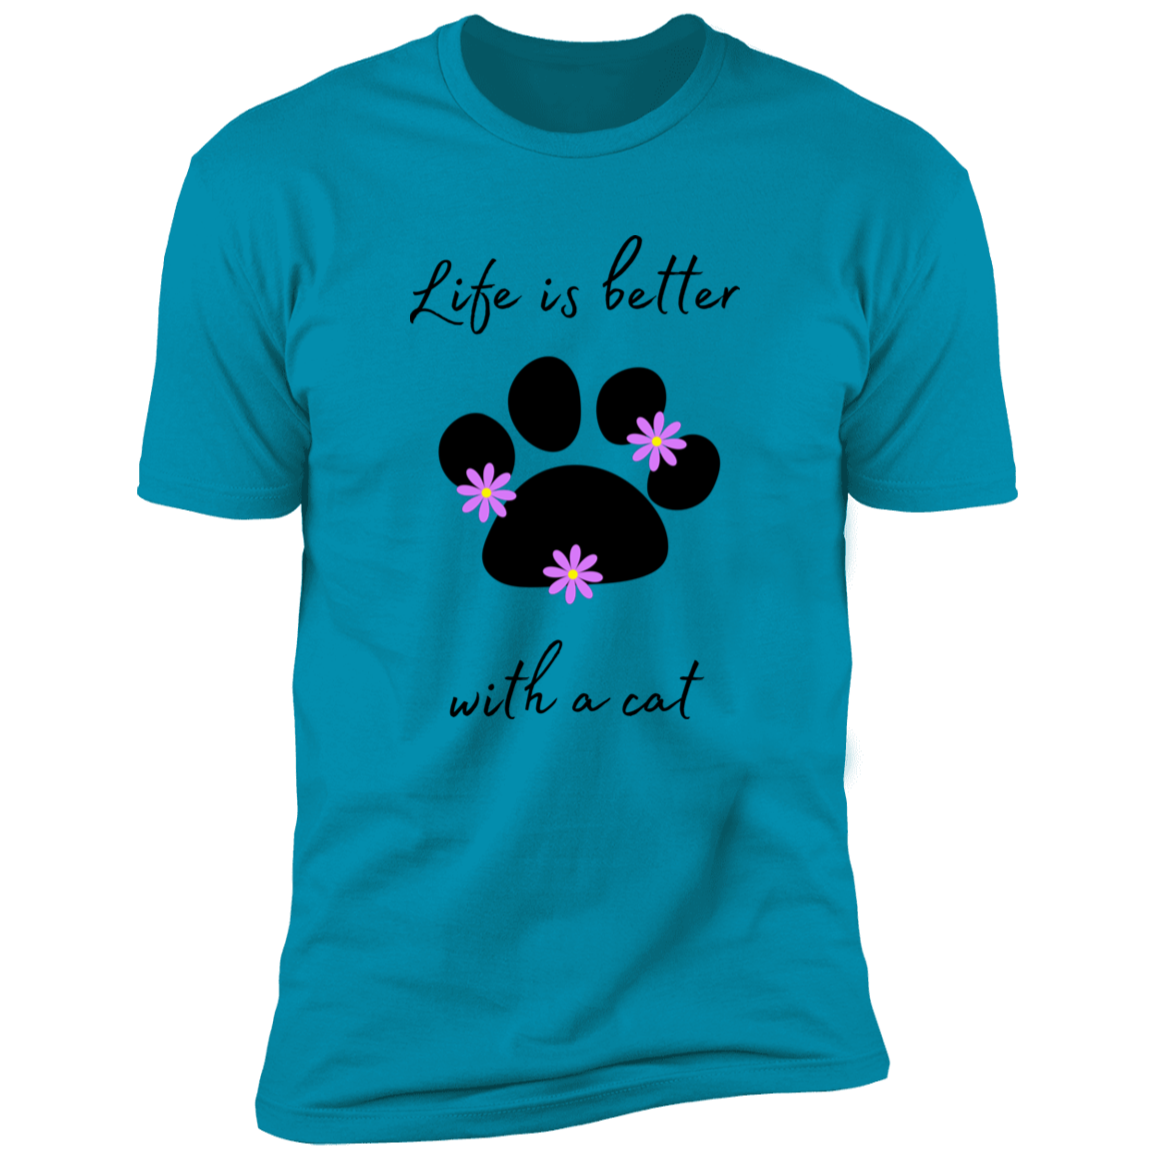 Life is Better with a Cat (Flower) cat t-shirt, cat shirt for humans, cat themed t-shirt, in turquoise 